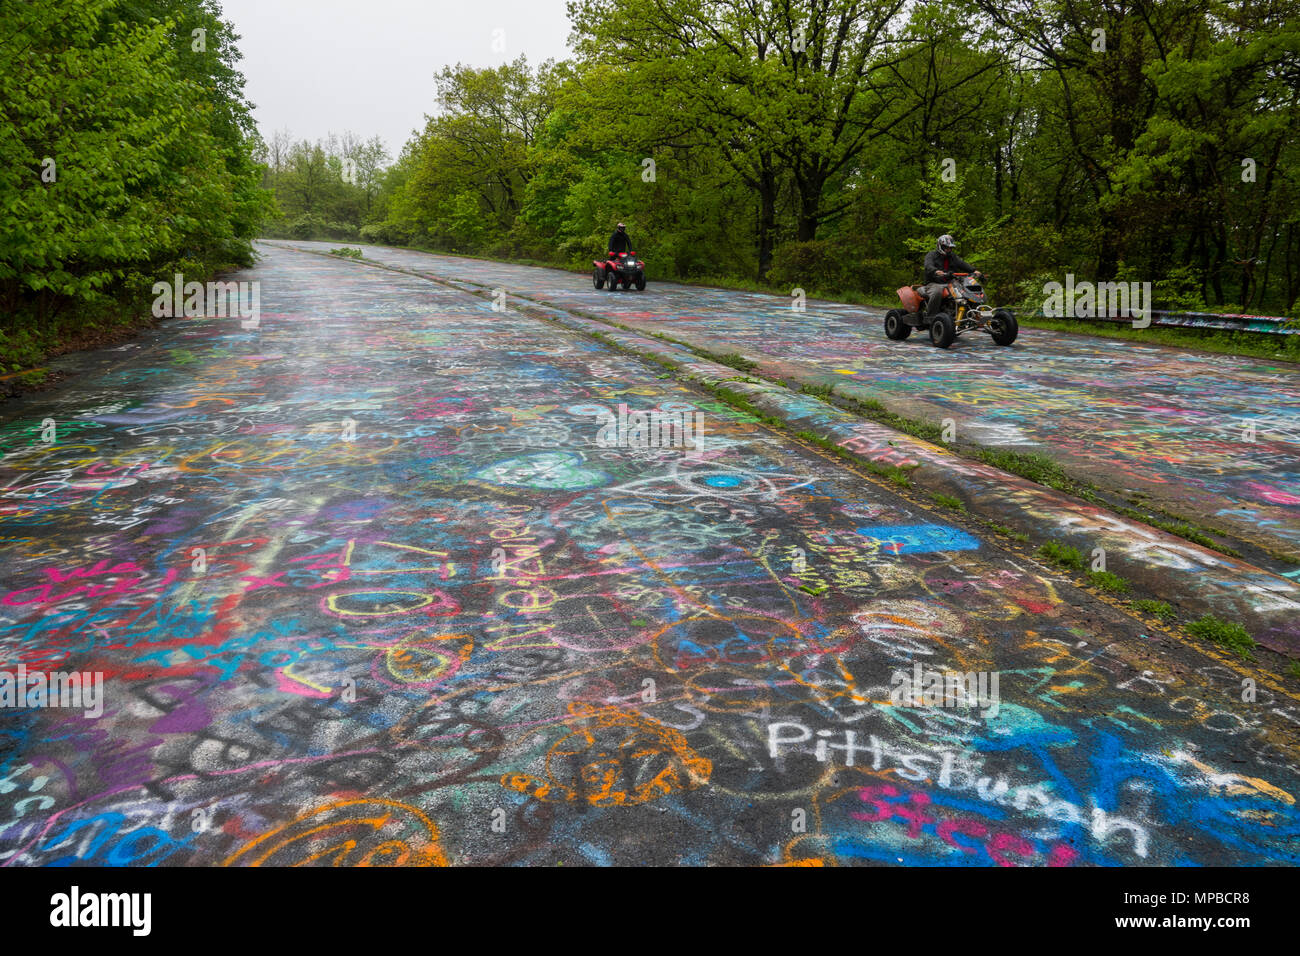 USA Pennsylvania PA Centralia An abandoned town and highway after a coal mine fire in 1962 People on ATVs Stock Photo